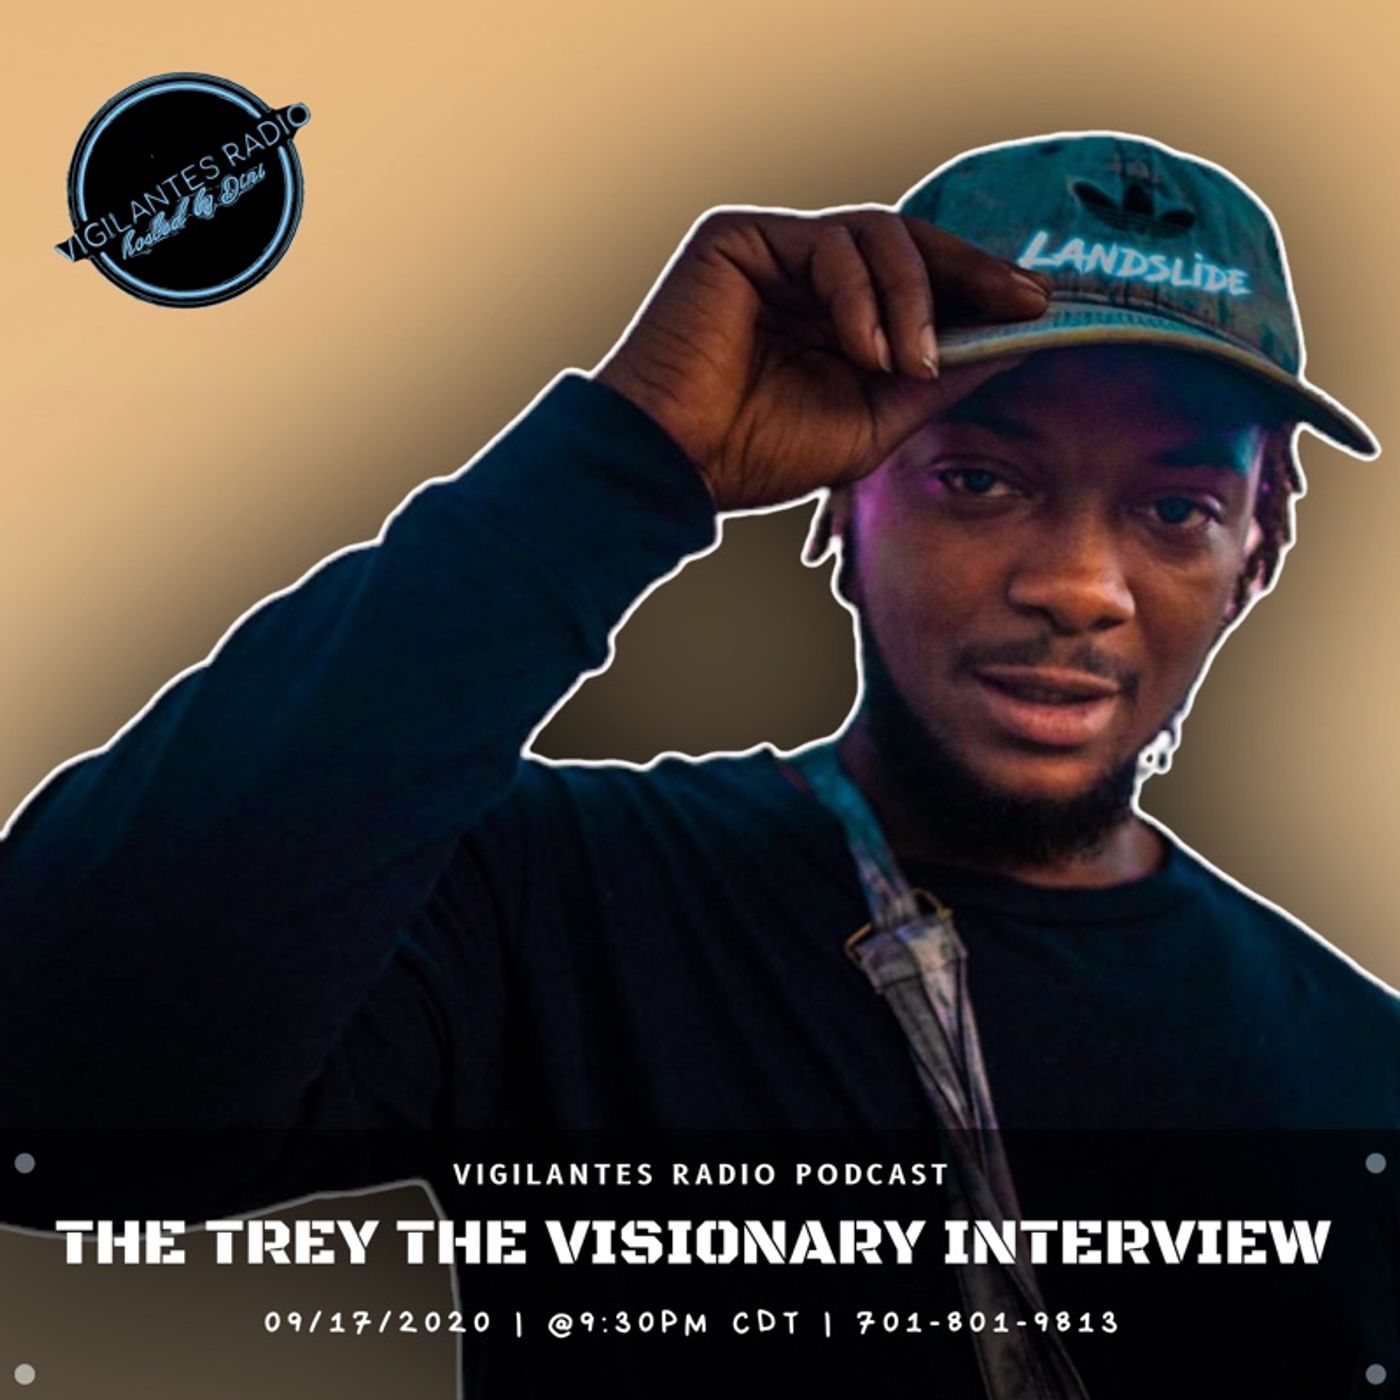 The Trey the Visionary Interview. Image